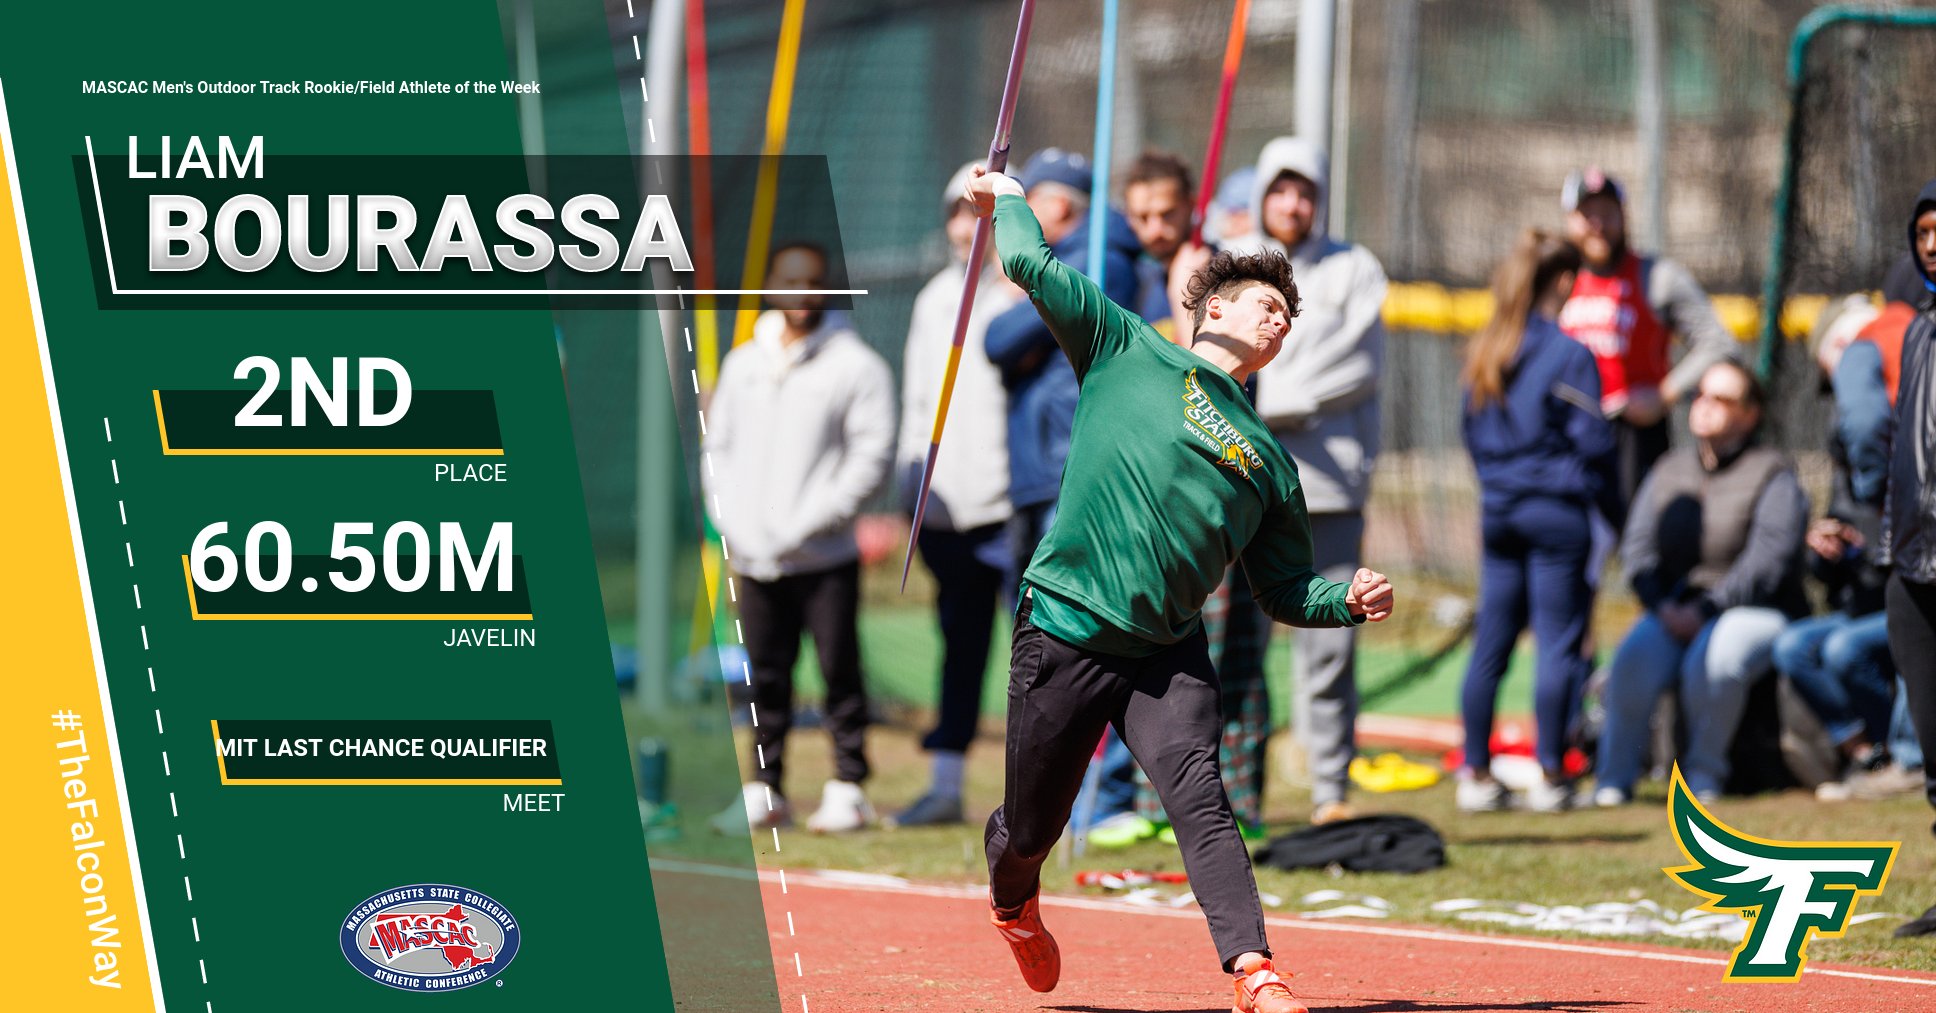 Bourassa Notches MASCAC MOTK Rookie And Field Athlete Of The Week Honors